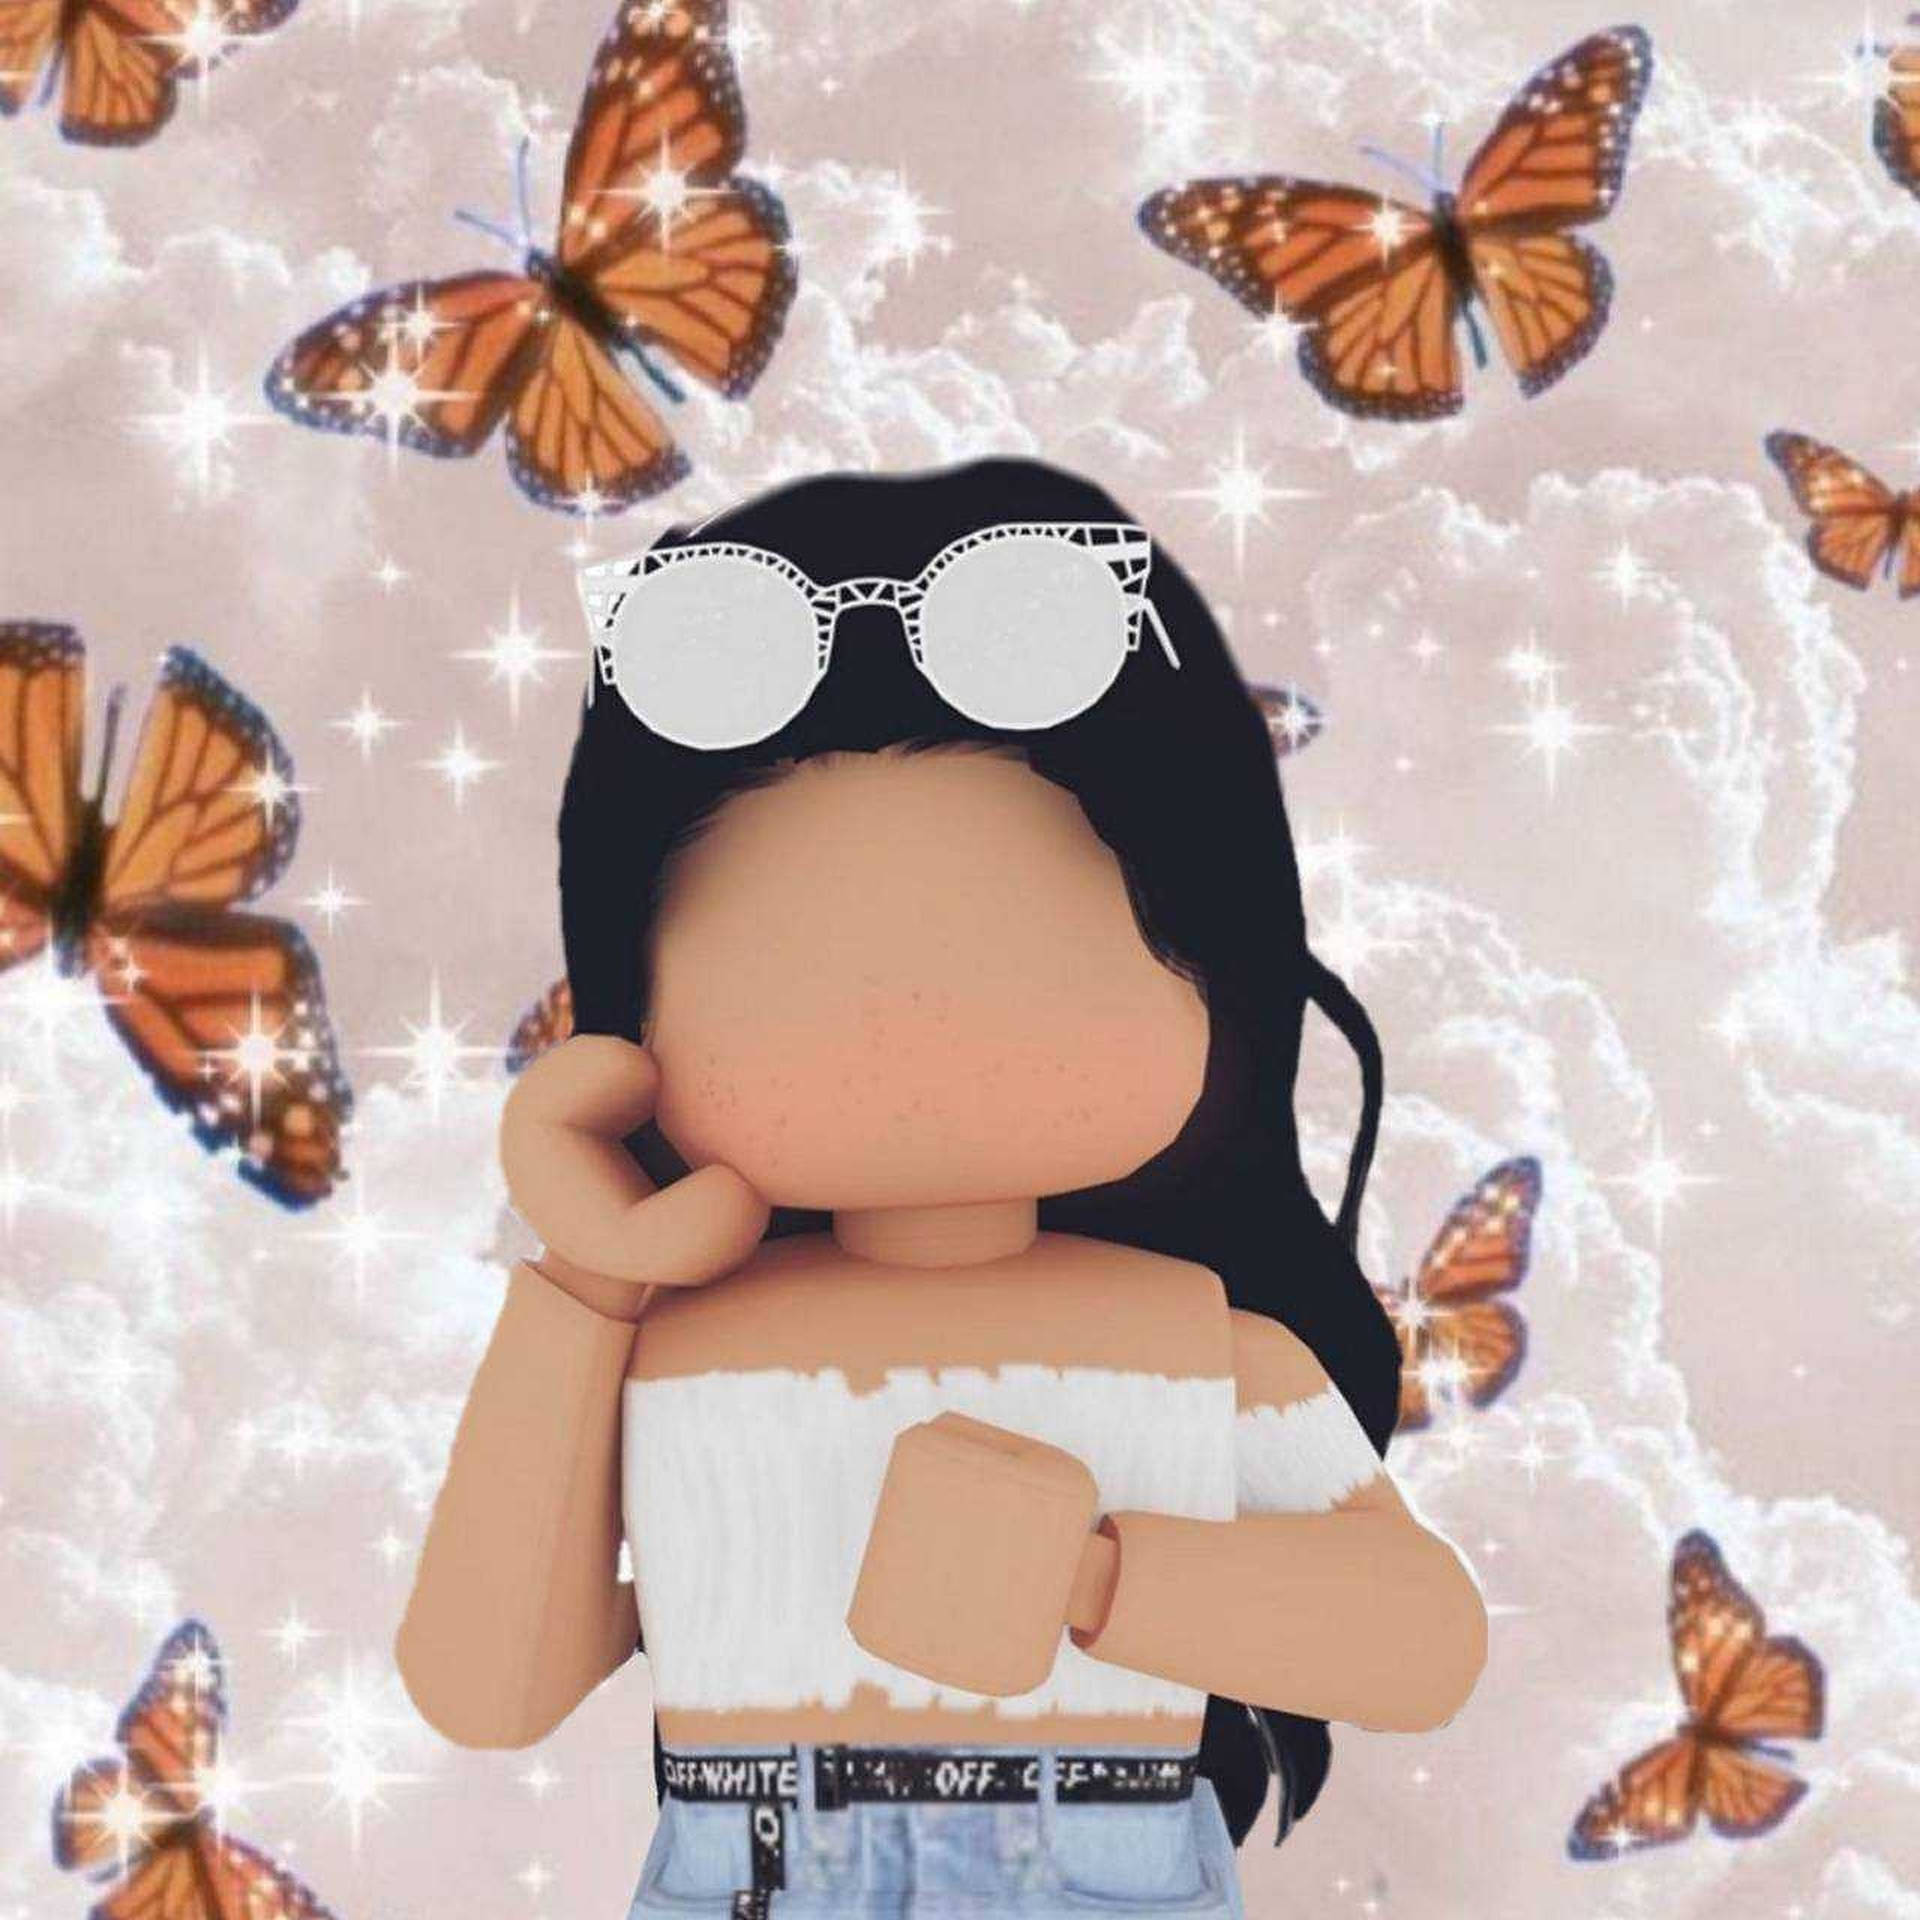 Roblox Girl With White Top Wallpaper